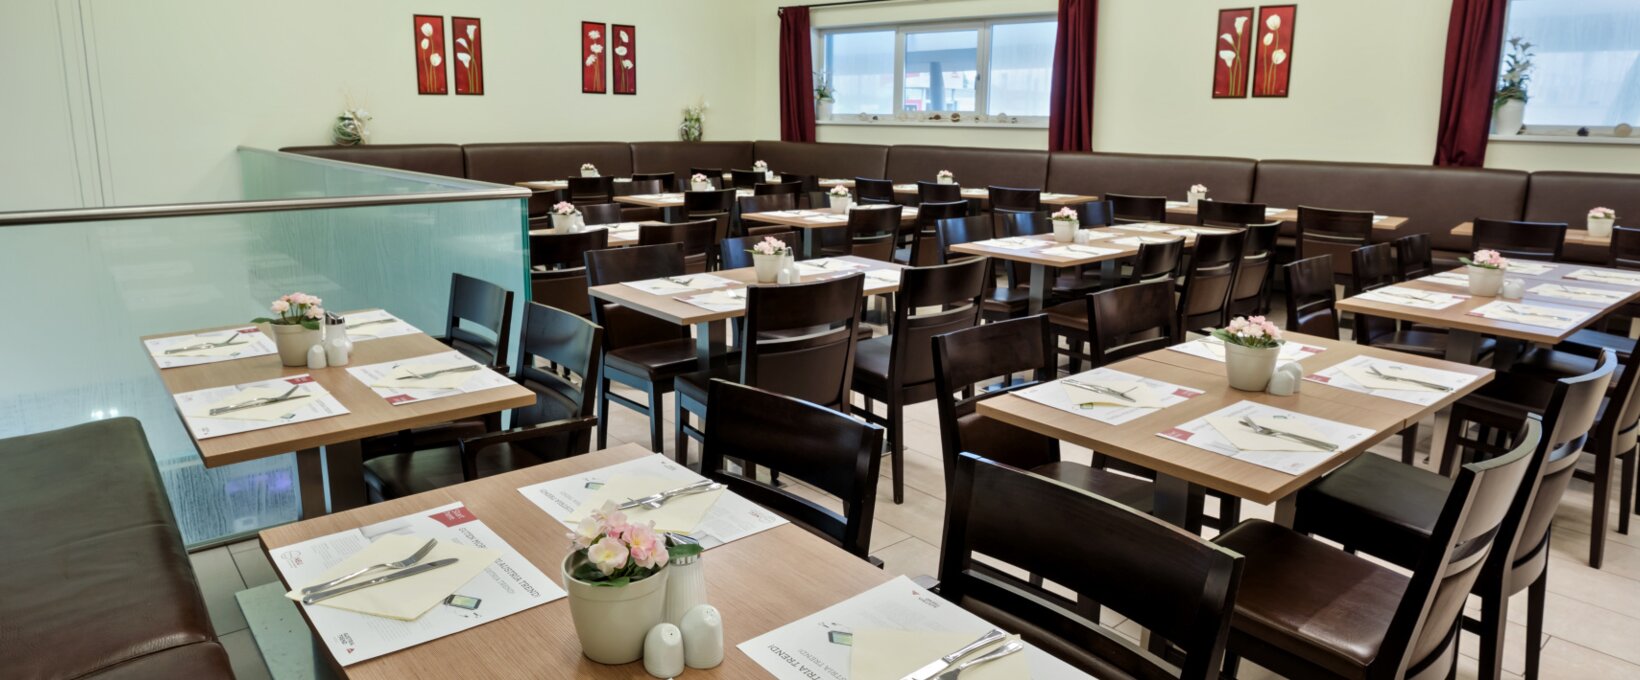 Breakfast restaurant with laid table | Hotel Salzburg Messe